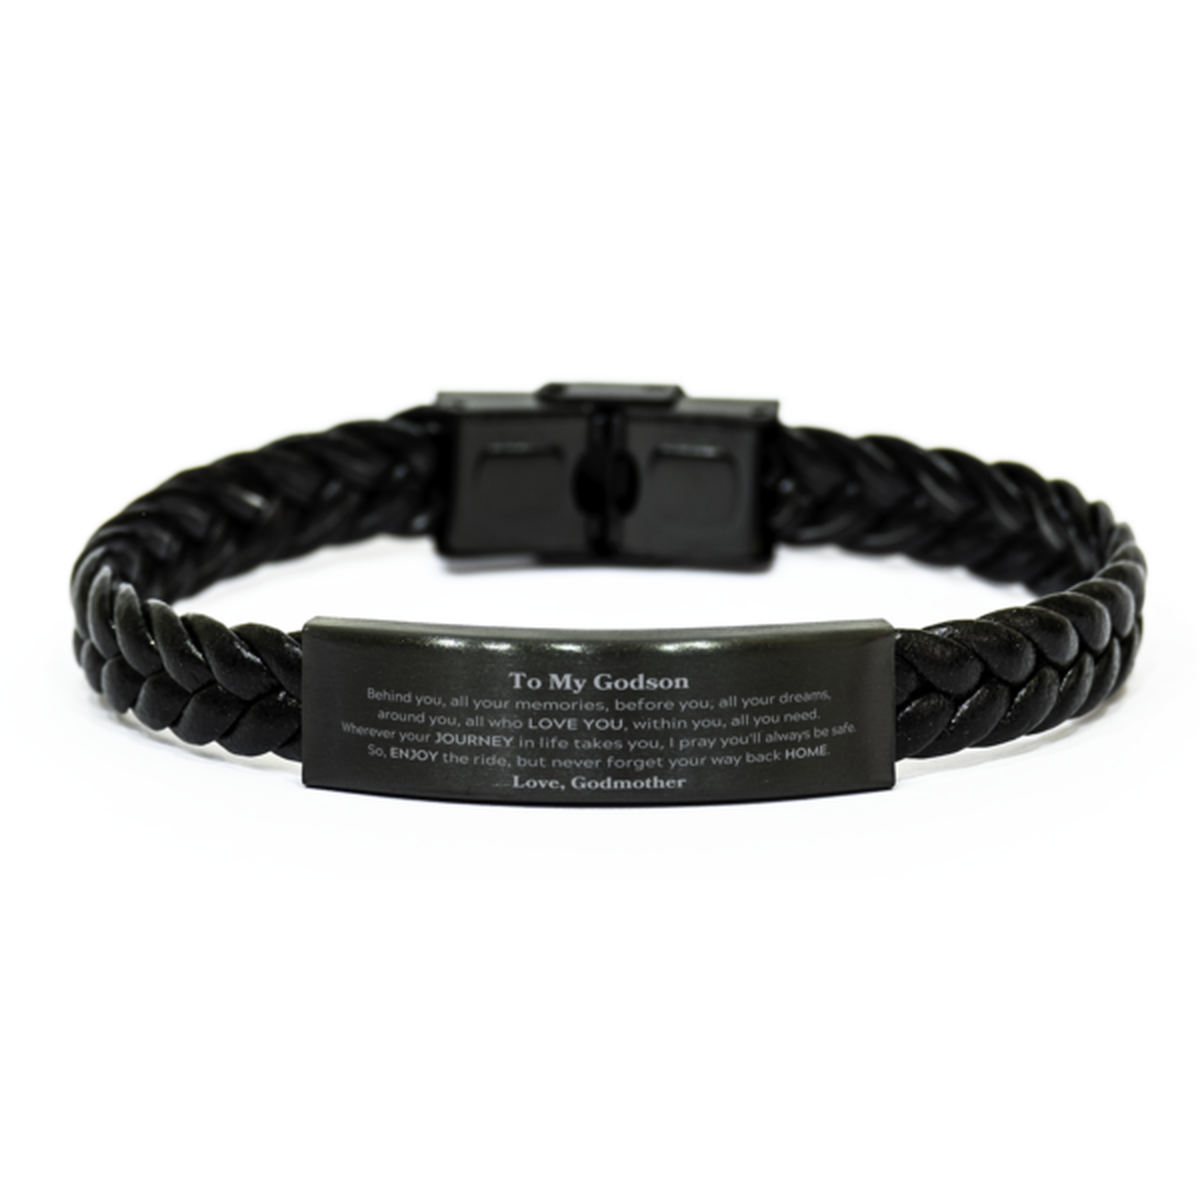 To My Godson Graduation Gifts from Godmother, Godson Braided Leather Bracelet Christmas Birthday Gifts for Godson Behind you, all your memories, before you, all your dreams. Love, Godmother